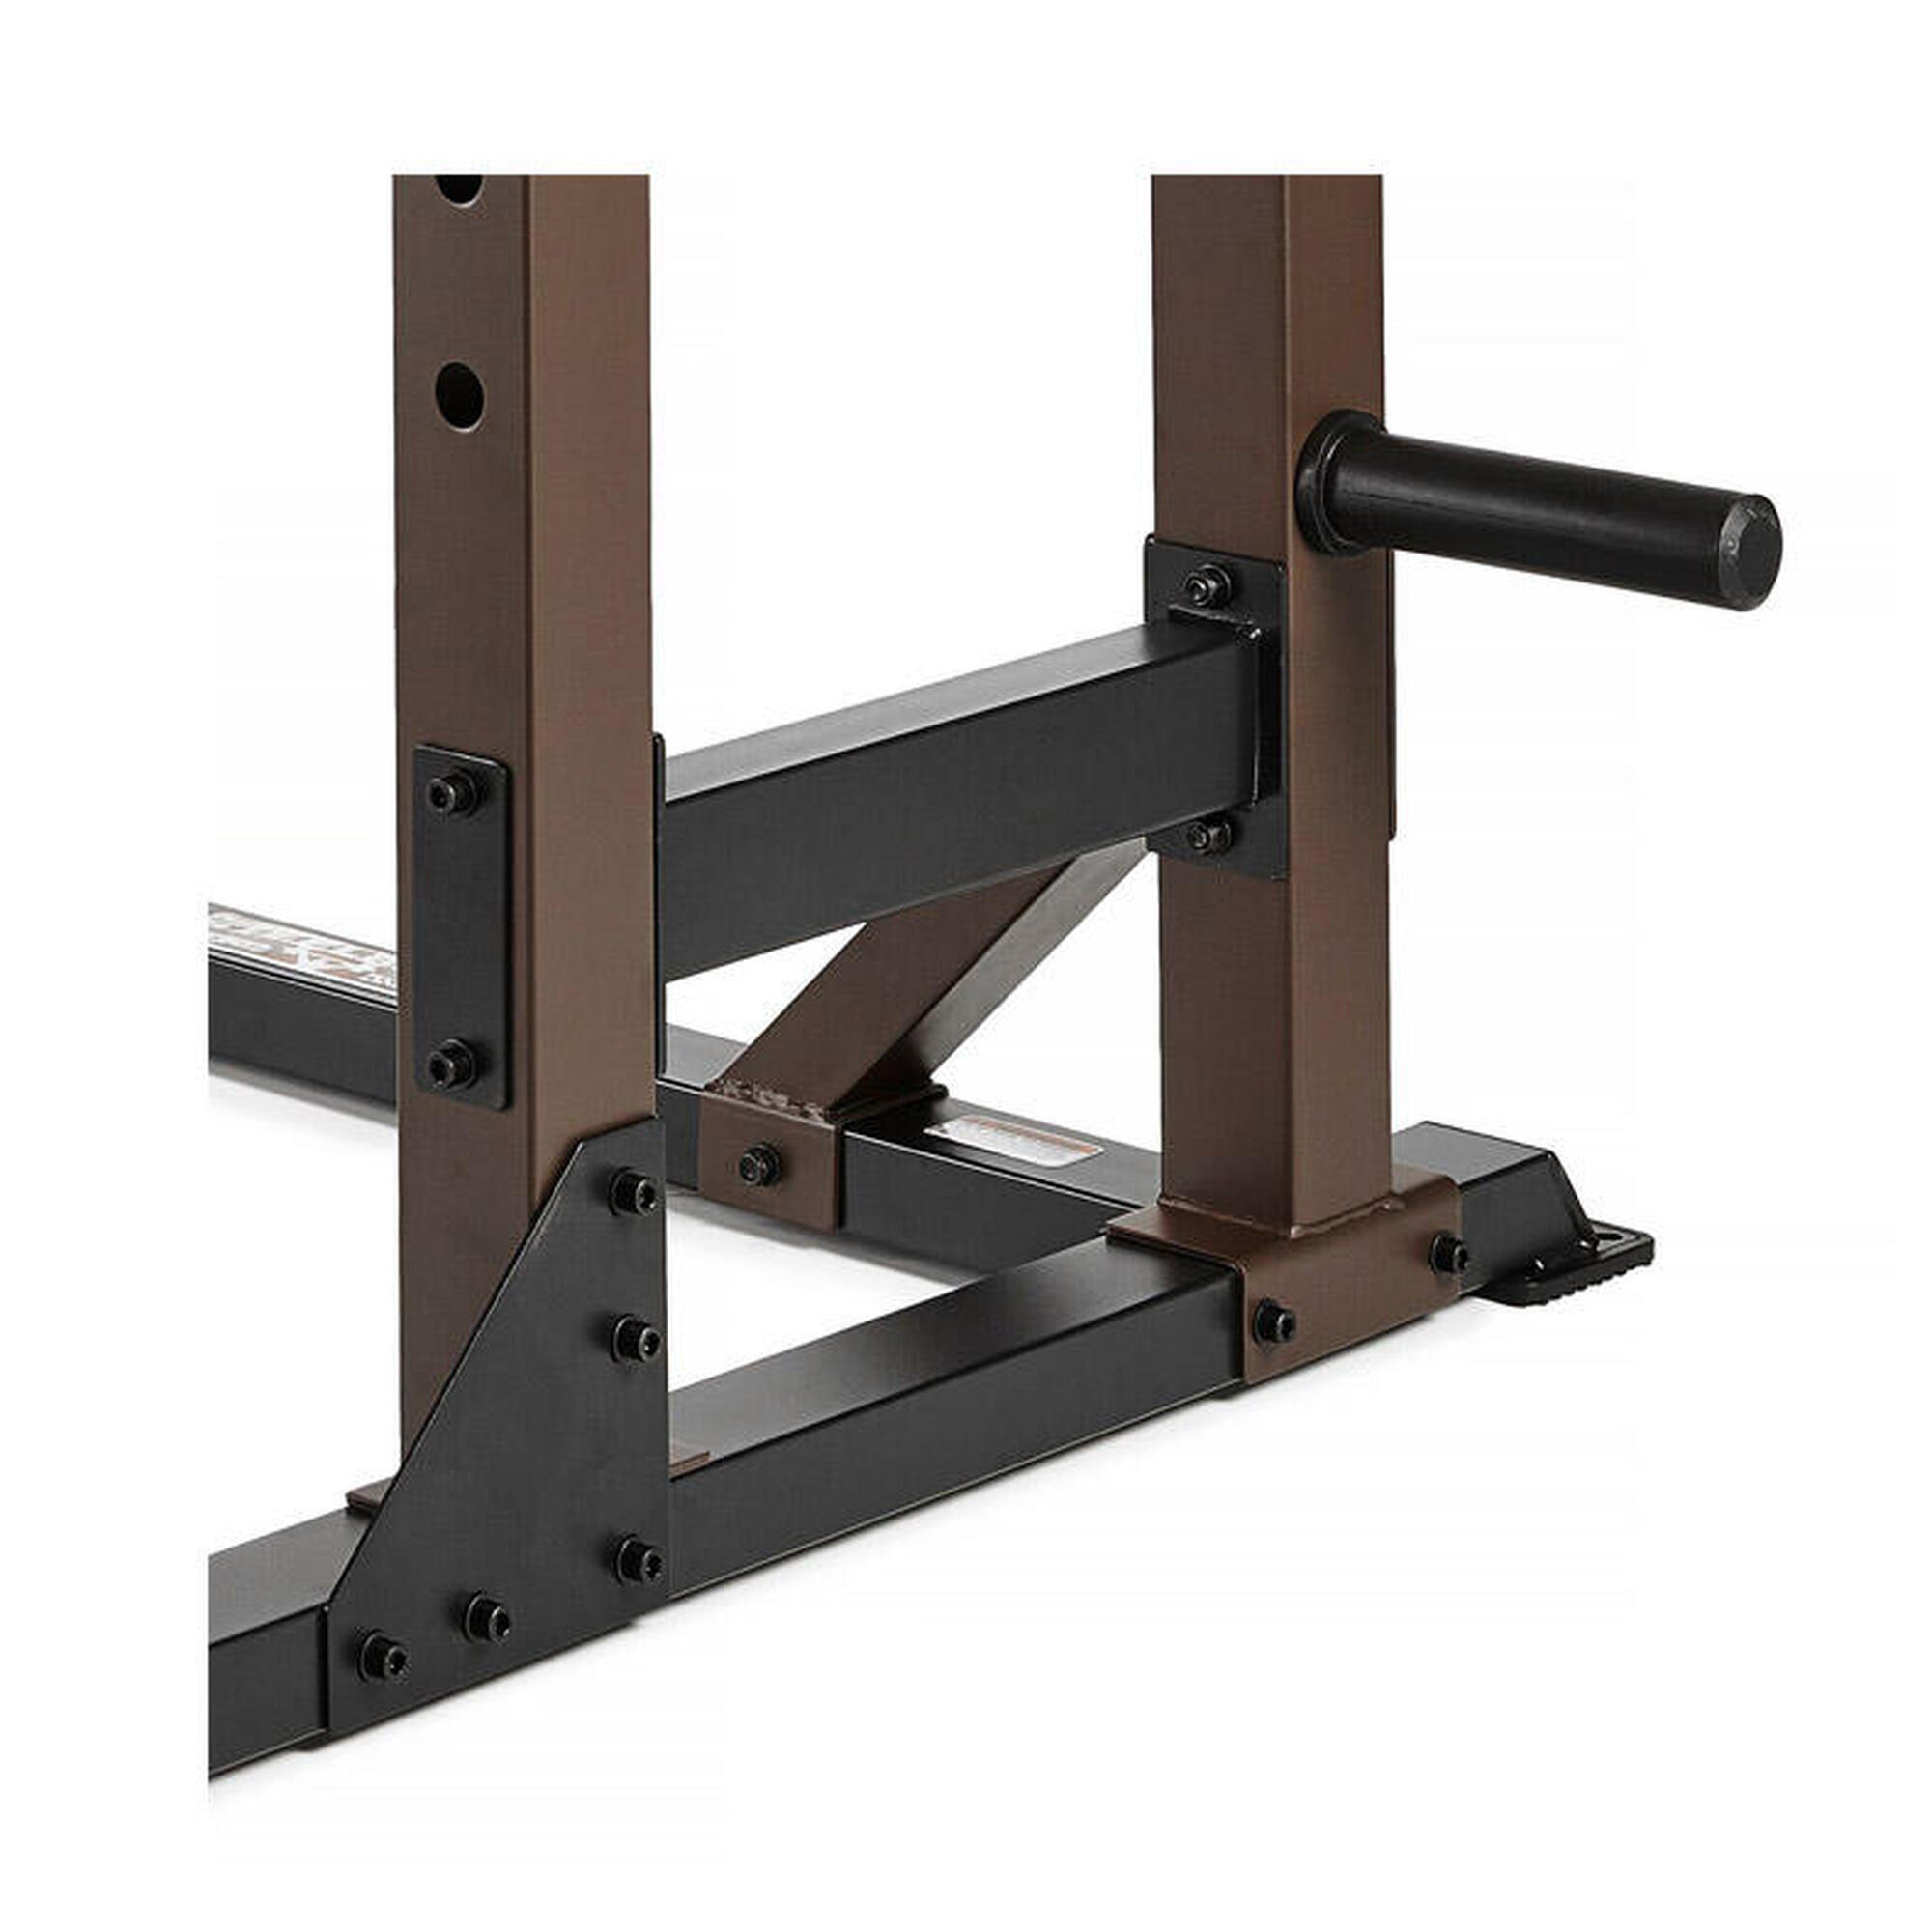 STEELBODY STB-70105 LIGHT COMMERCIAL SQUAT RACK & BASE TRAINER 4/7